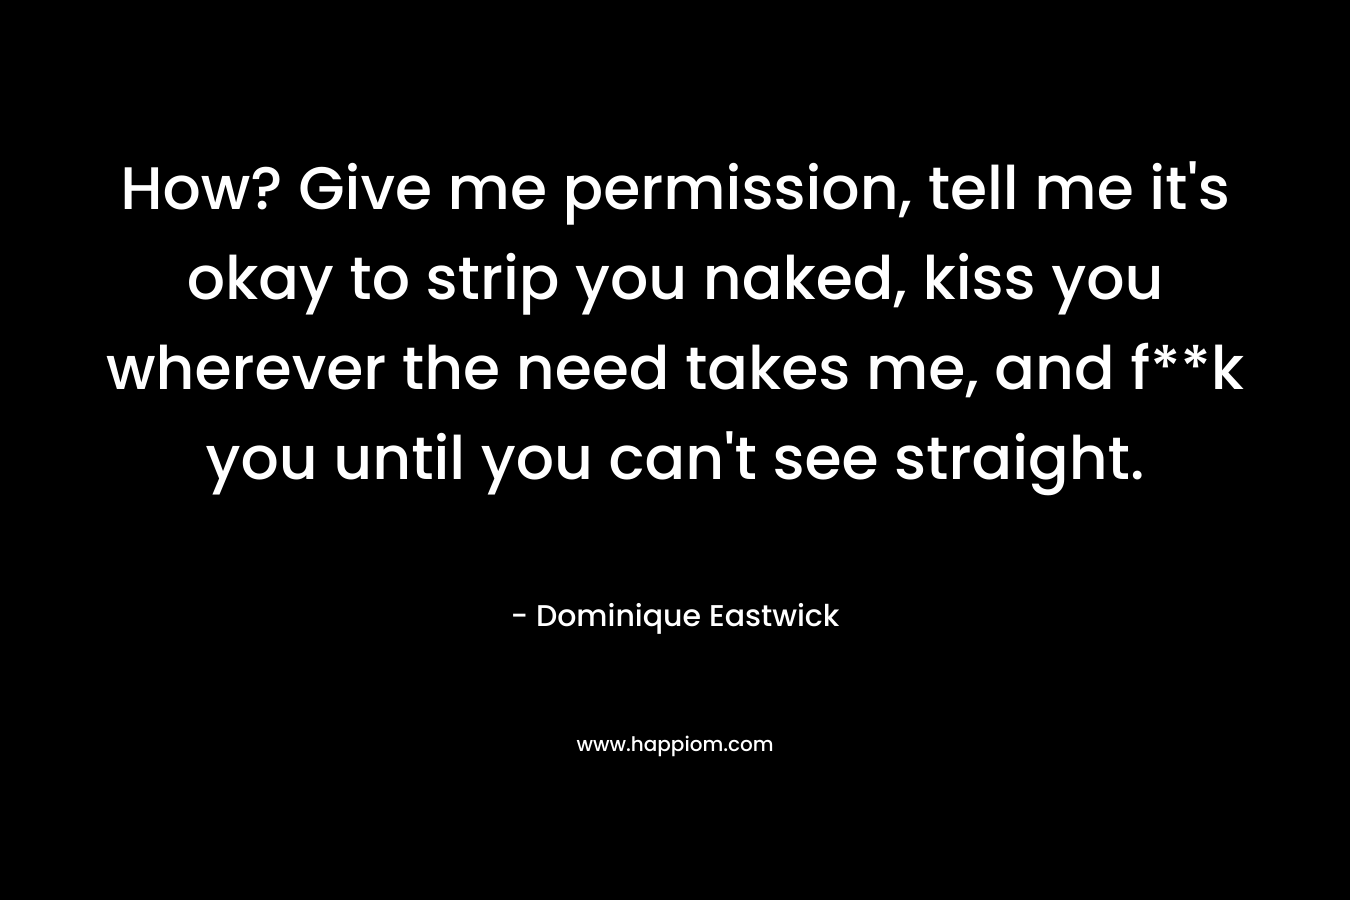 How? Give me permission, tell me it’s okay to strip you naked, kiss you wherever the need takes me, and f**k you until you can’t see straight. – Dominique Eastwick